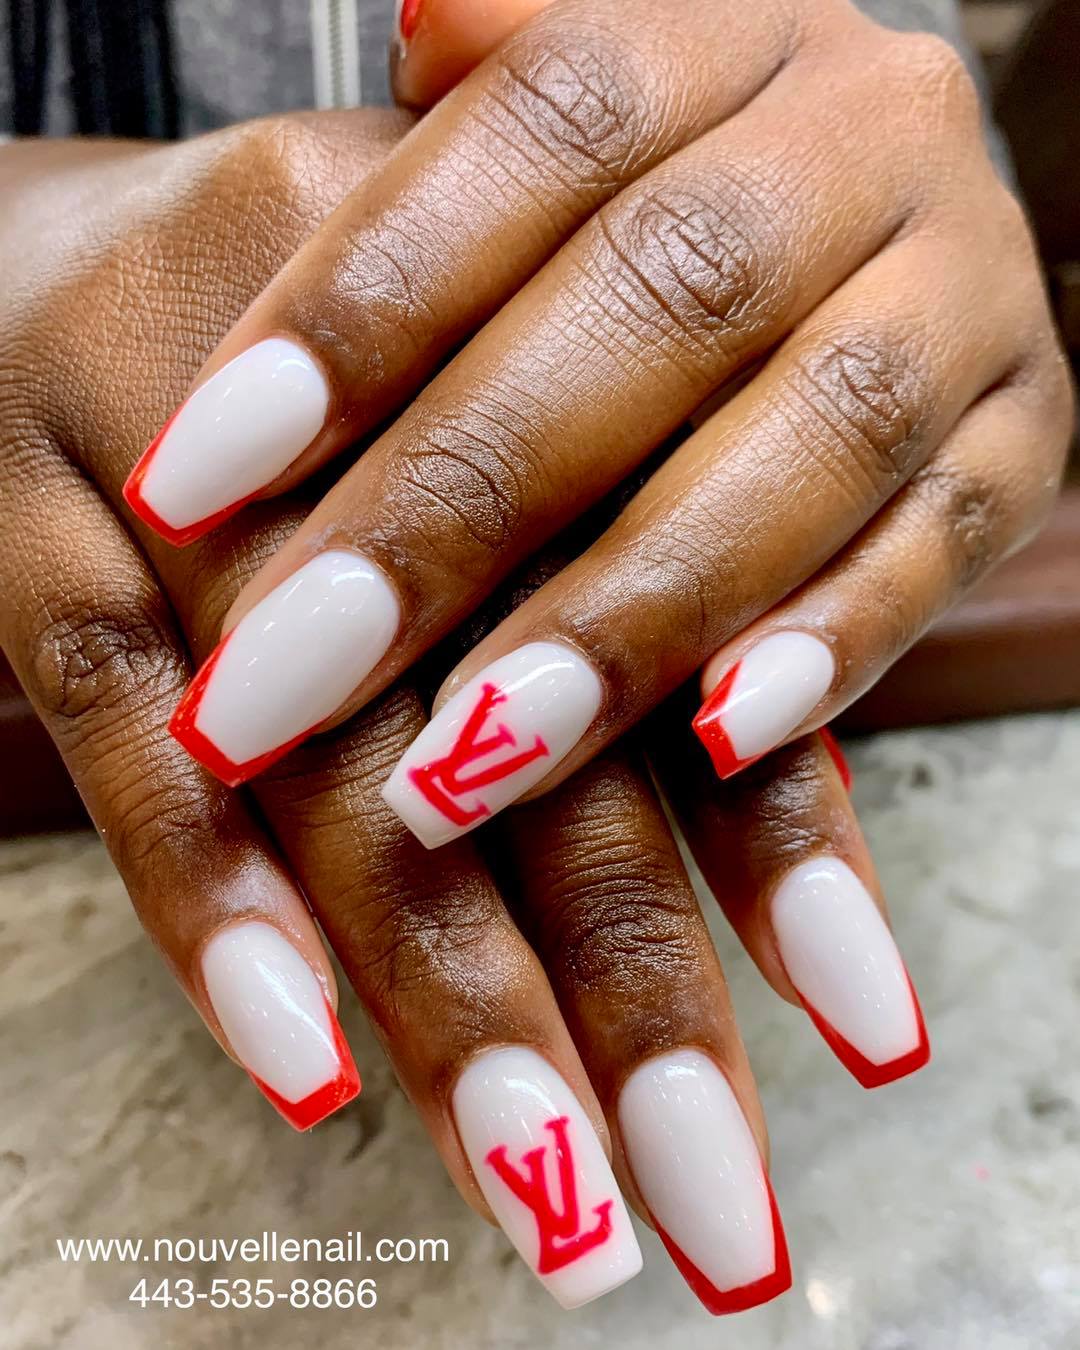 White coffin nails with LV logo designs